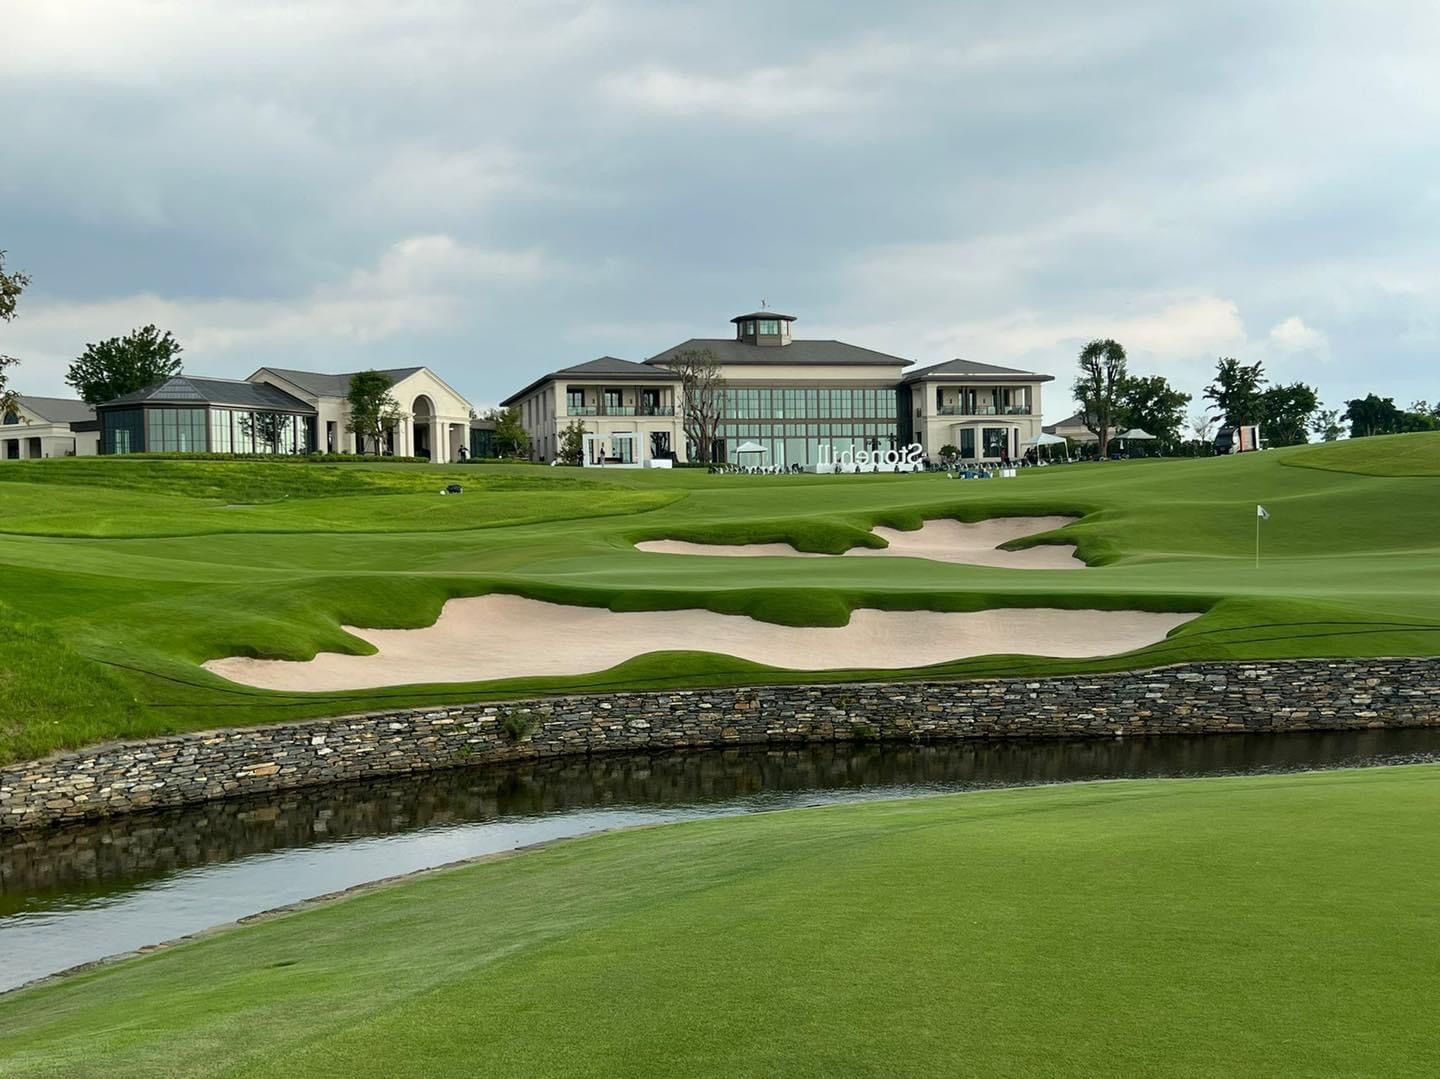 StoneHill Golf Club is opening in this weekend